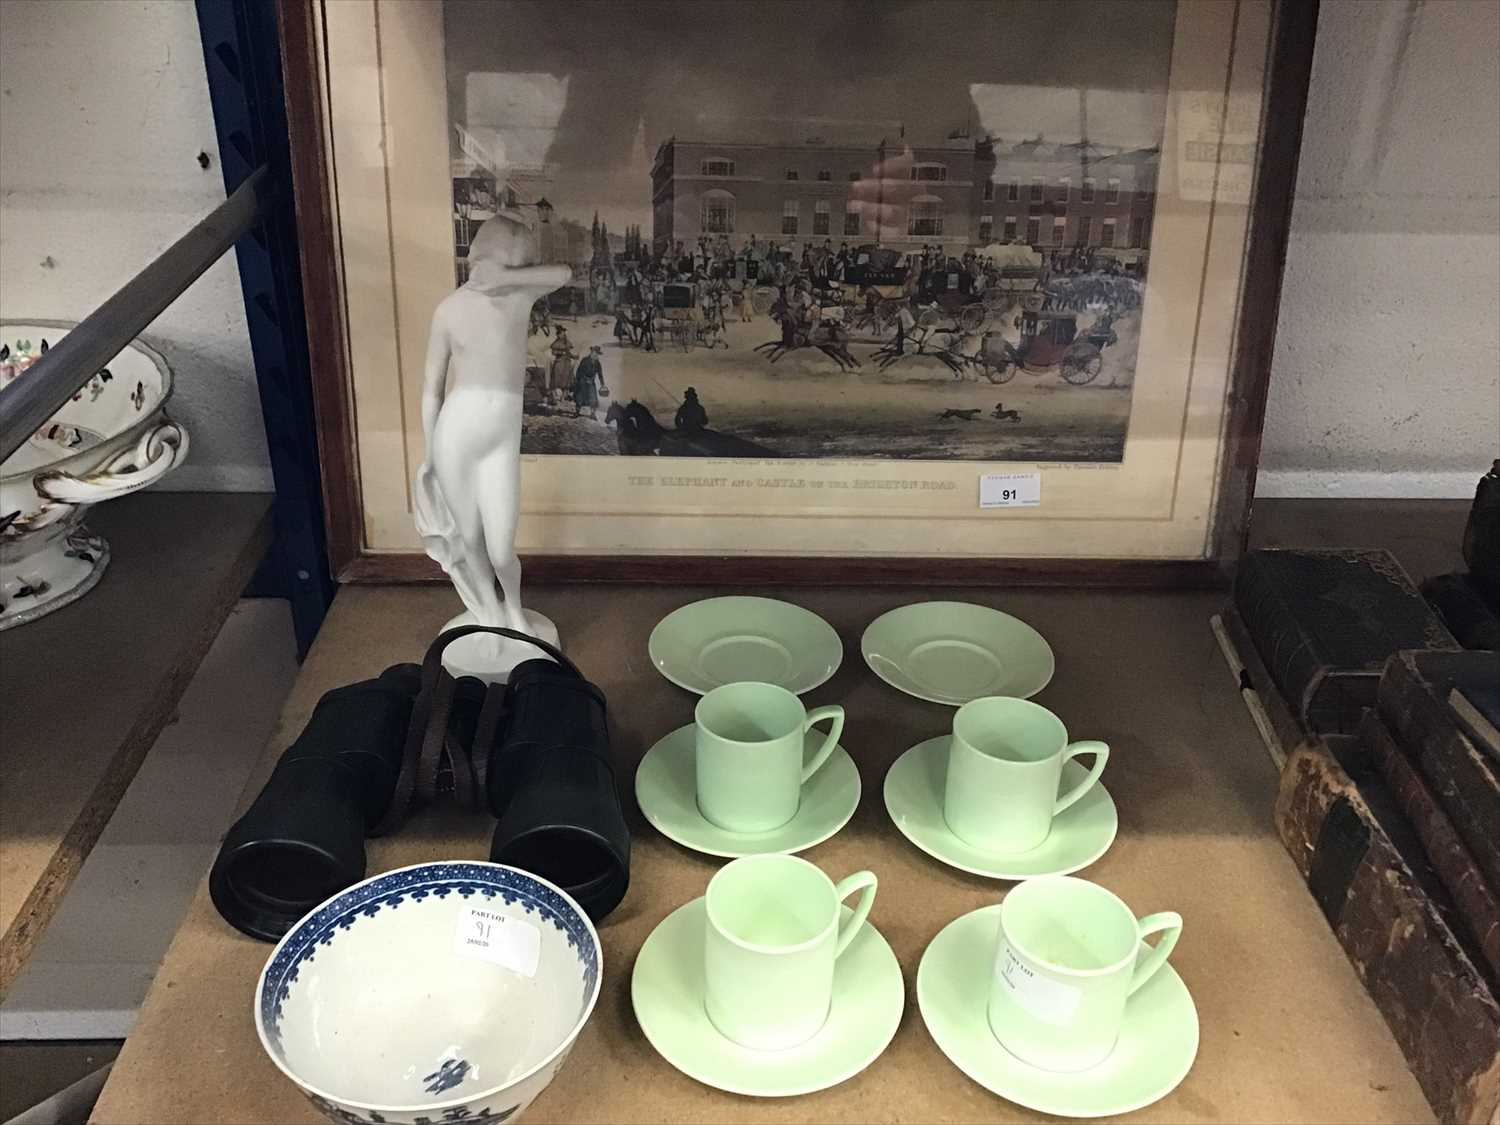 Lot 91 - Elephant & Castle print, Limoges figure, Grafton coffee cans and saucers and a pair of binoculars